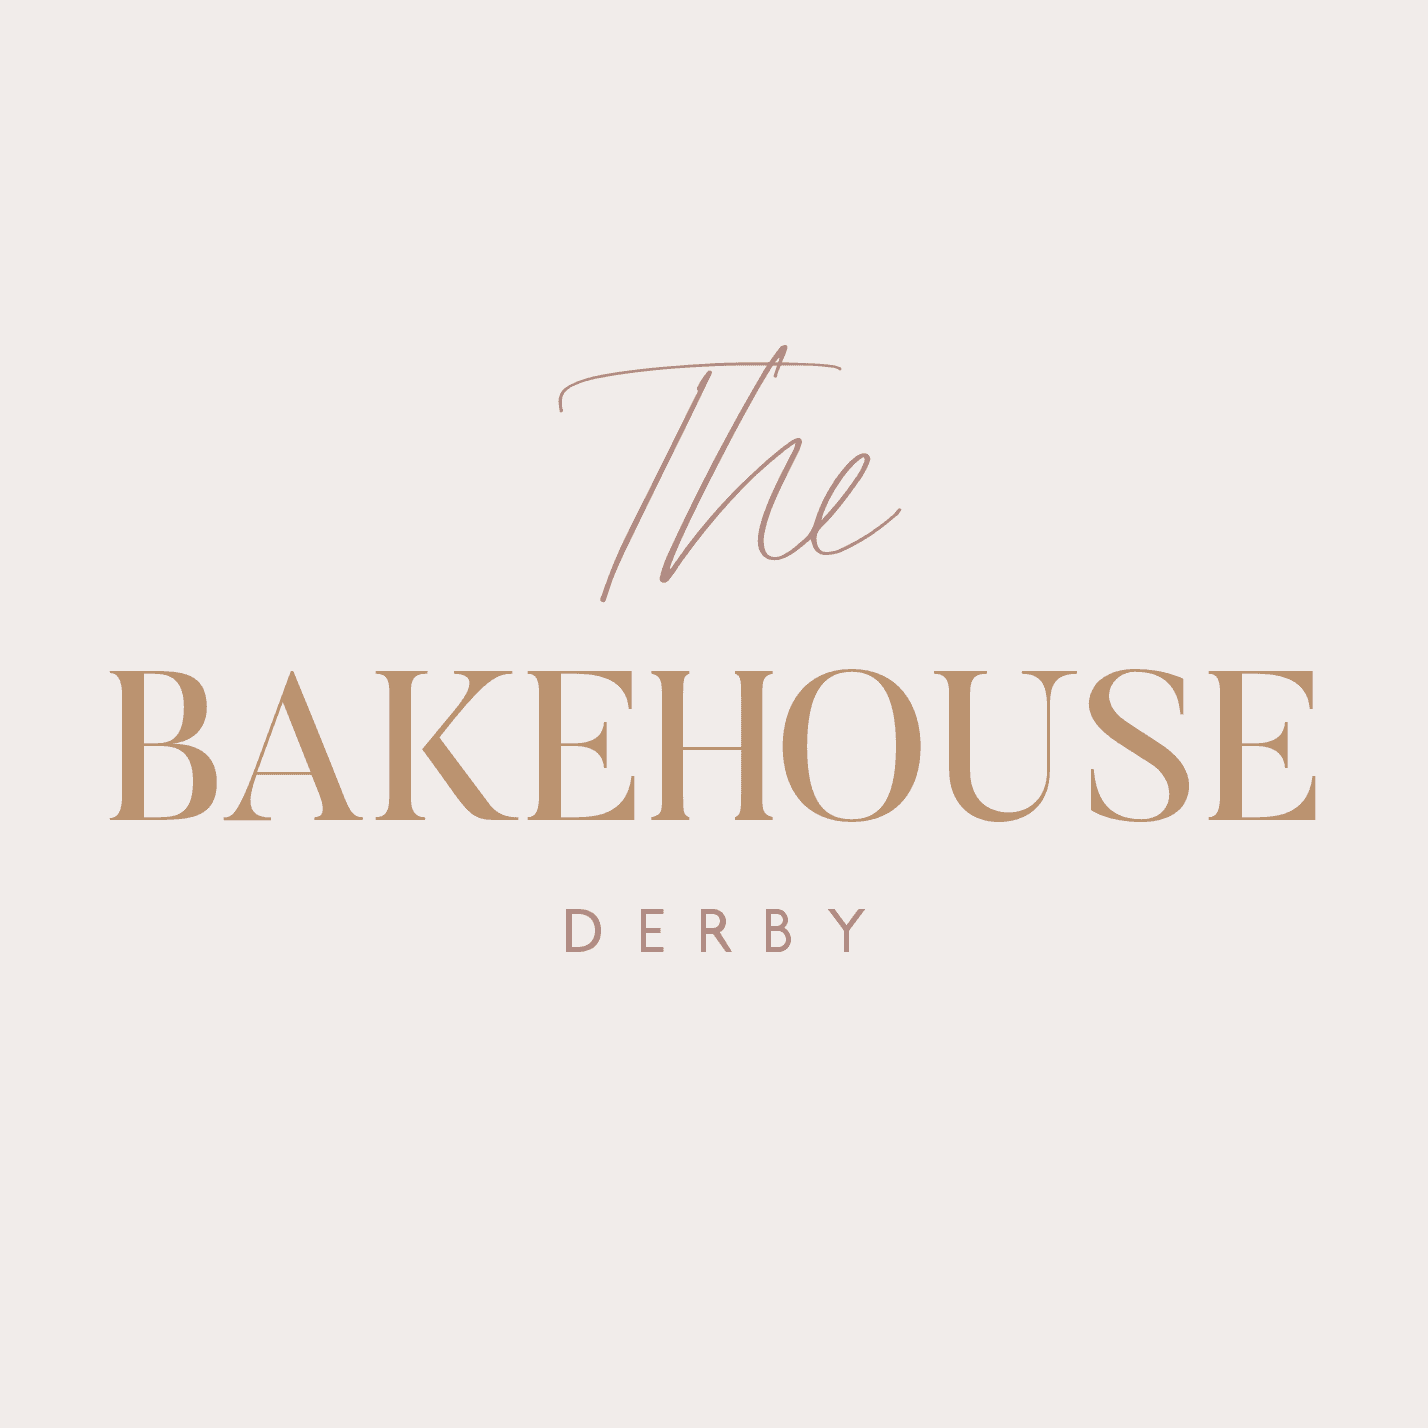 The Bakehouse Derby